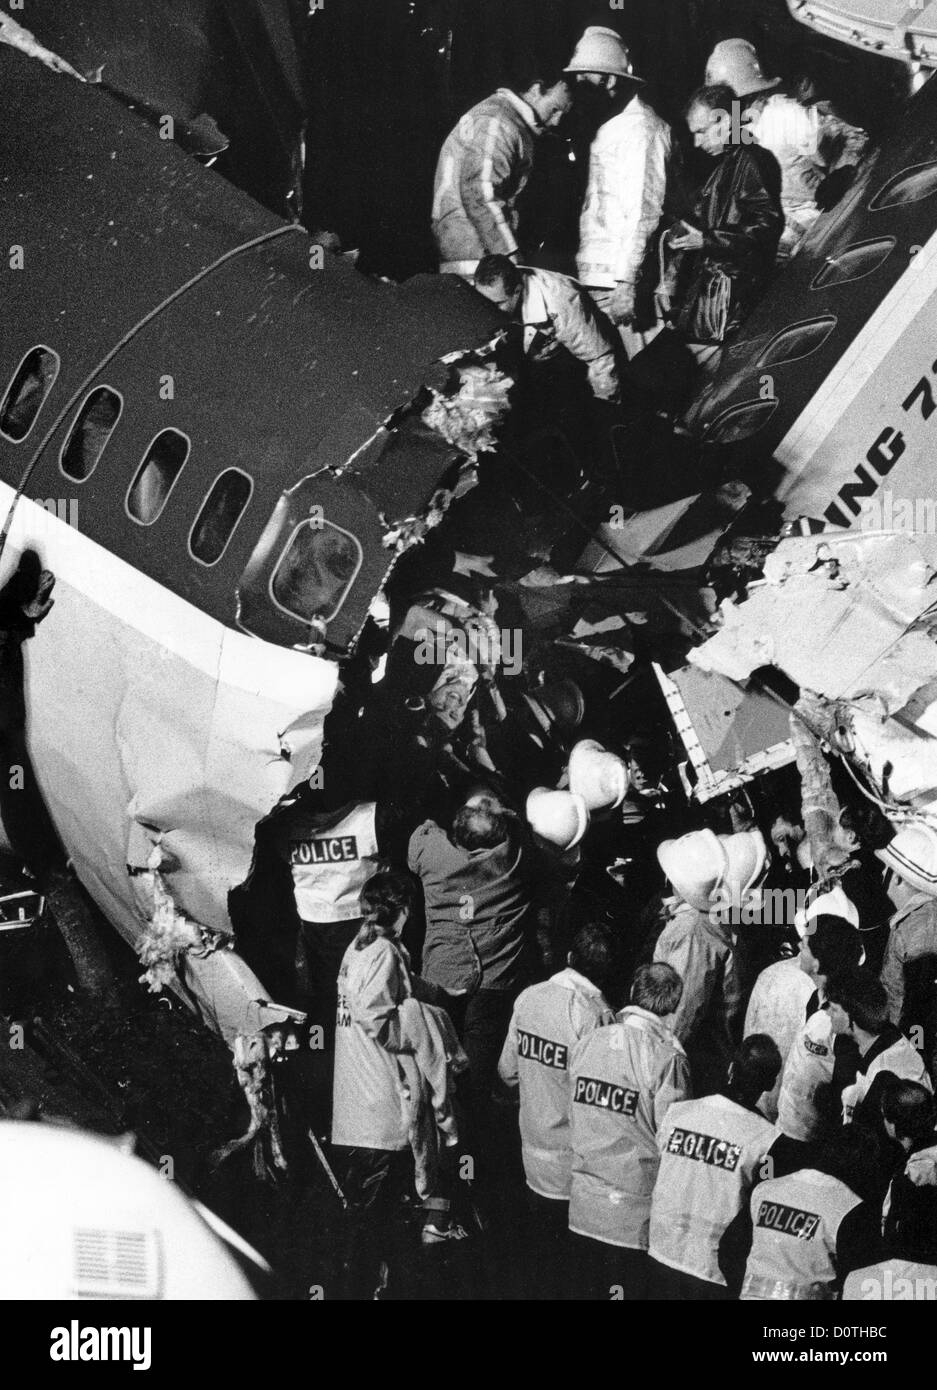 Kegworth Air Disaster 1989 a man is rescued from the wreckage at night. plane crash accident tragedy Britain 1980s. Picture by DAVID BAGNALL Stock Photo